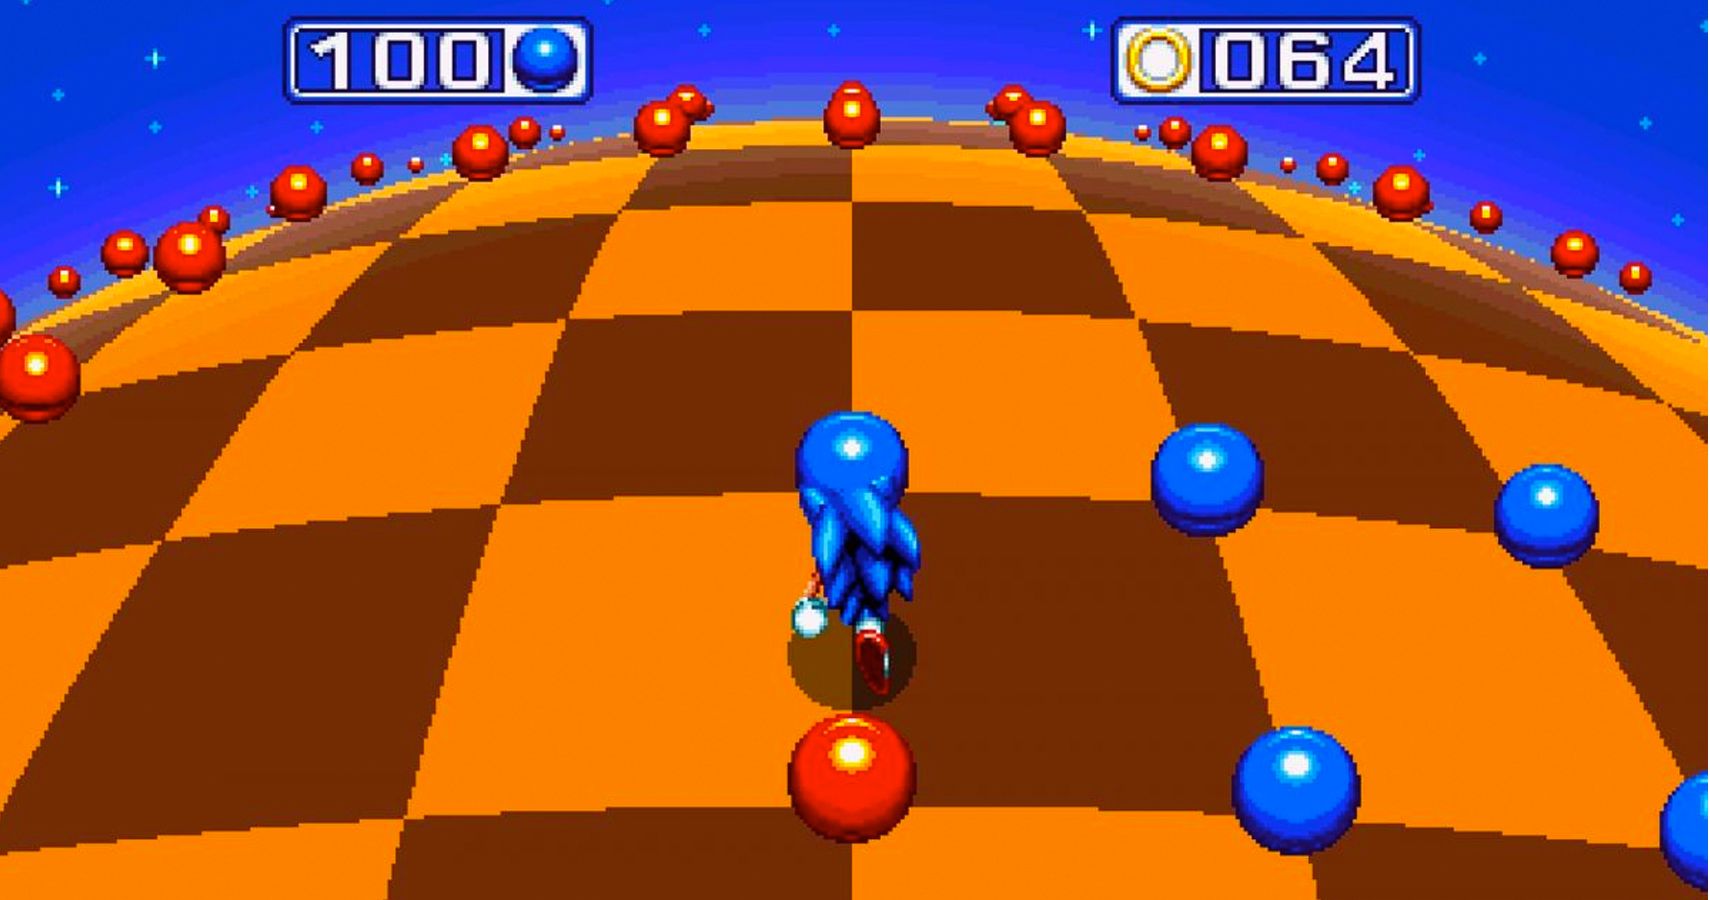 Sonic Mania Bonus Stages Will Make You Feel Like Its 1993 Again